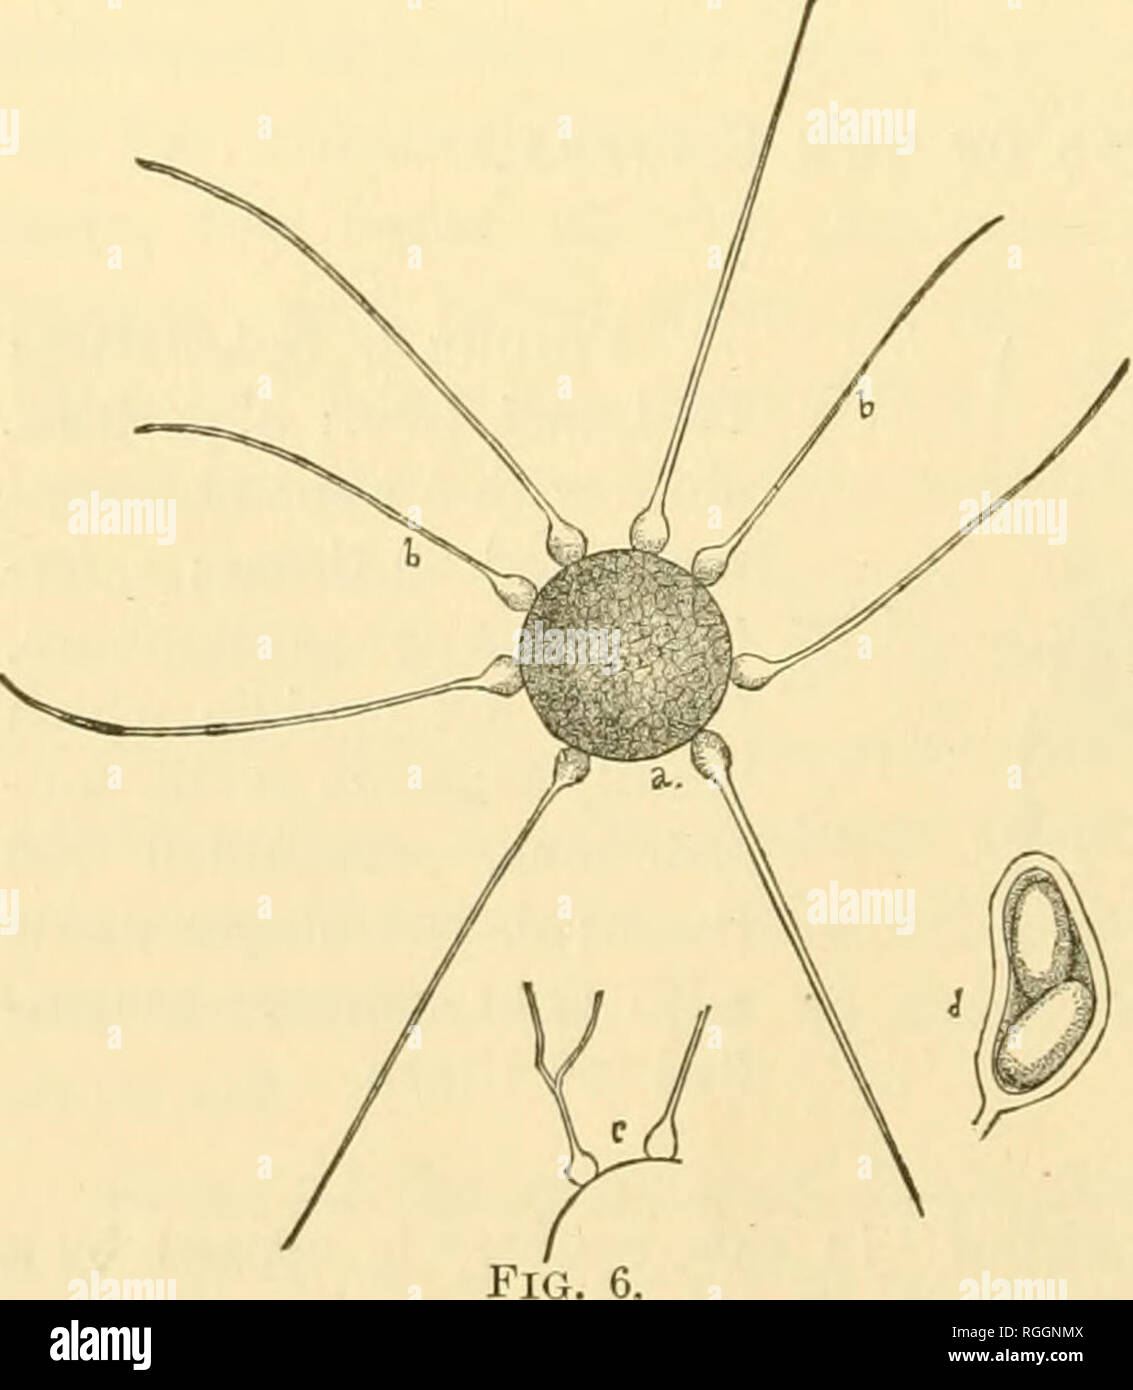 . Bulletin of the Illinois State Laboratory of Natural History. Natural history -- Illinois. FiGUEE 4. Erysiphe chicoracearum, DC. A ruptured perithecium with thread-like appendages and protrud- ing asci, each containing two spores, — magnified 90 times. n i^lk ^t4.l*' Figure 5. Uncinula am- pelopsidis, Peck: a, perithe- cium with the numerous appendages (6) coiled at the tip,— magnified 100 times; c, ^^^ one of the appendages (tip) further magnified; d,anas- cus with five spores,—magni- fied 200 times. The lower, pointed end of the ascus is attached to the bottom of the cavity of the perithe Stock Photo